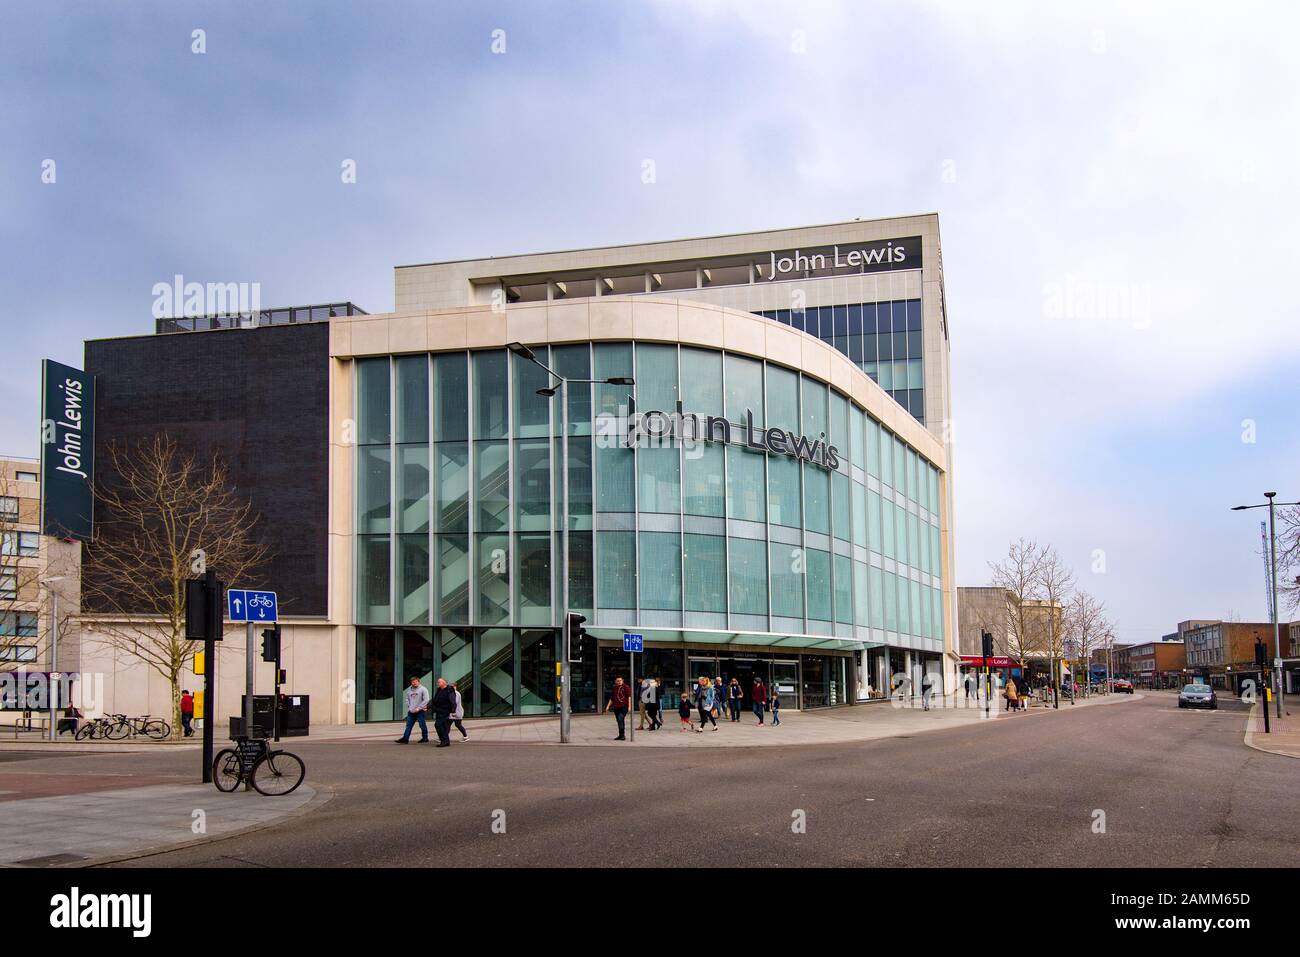 EXETER, DEVON, UK - 31MAR19: The John Lewis store is one of the iconic buildings in the centre of Exeter. The department store Bobby and Co operated f Stock Photo